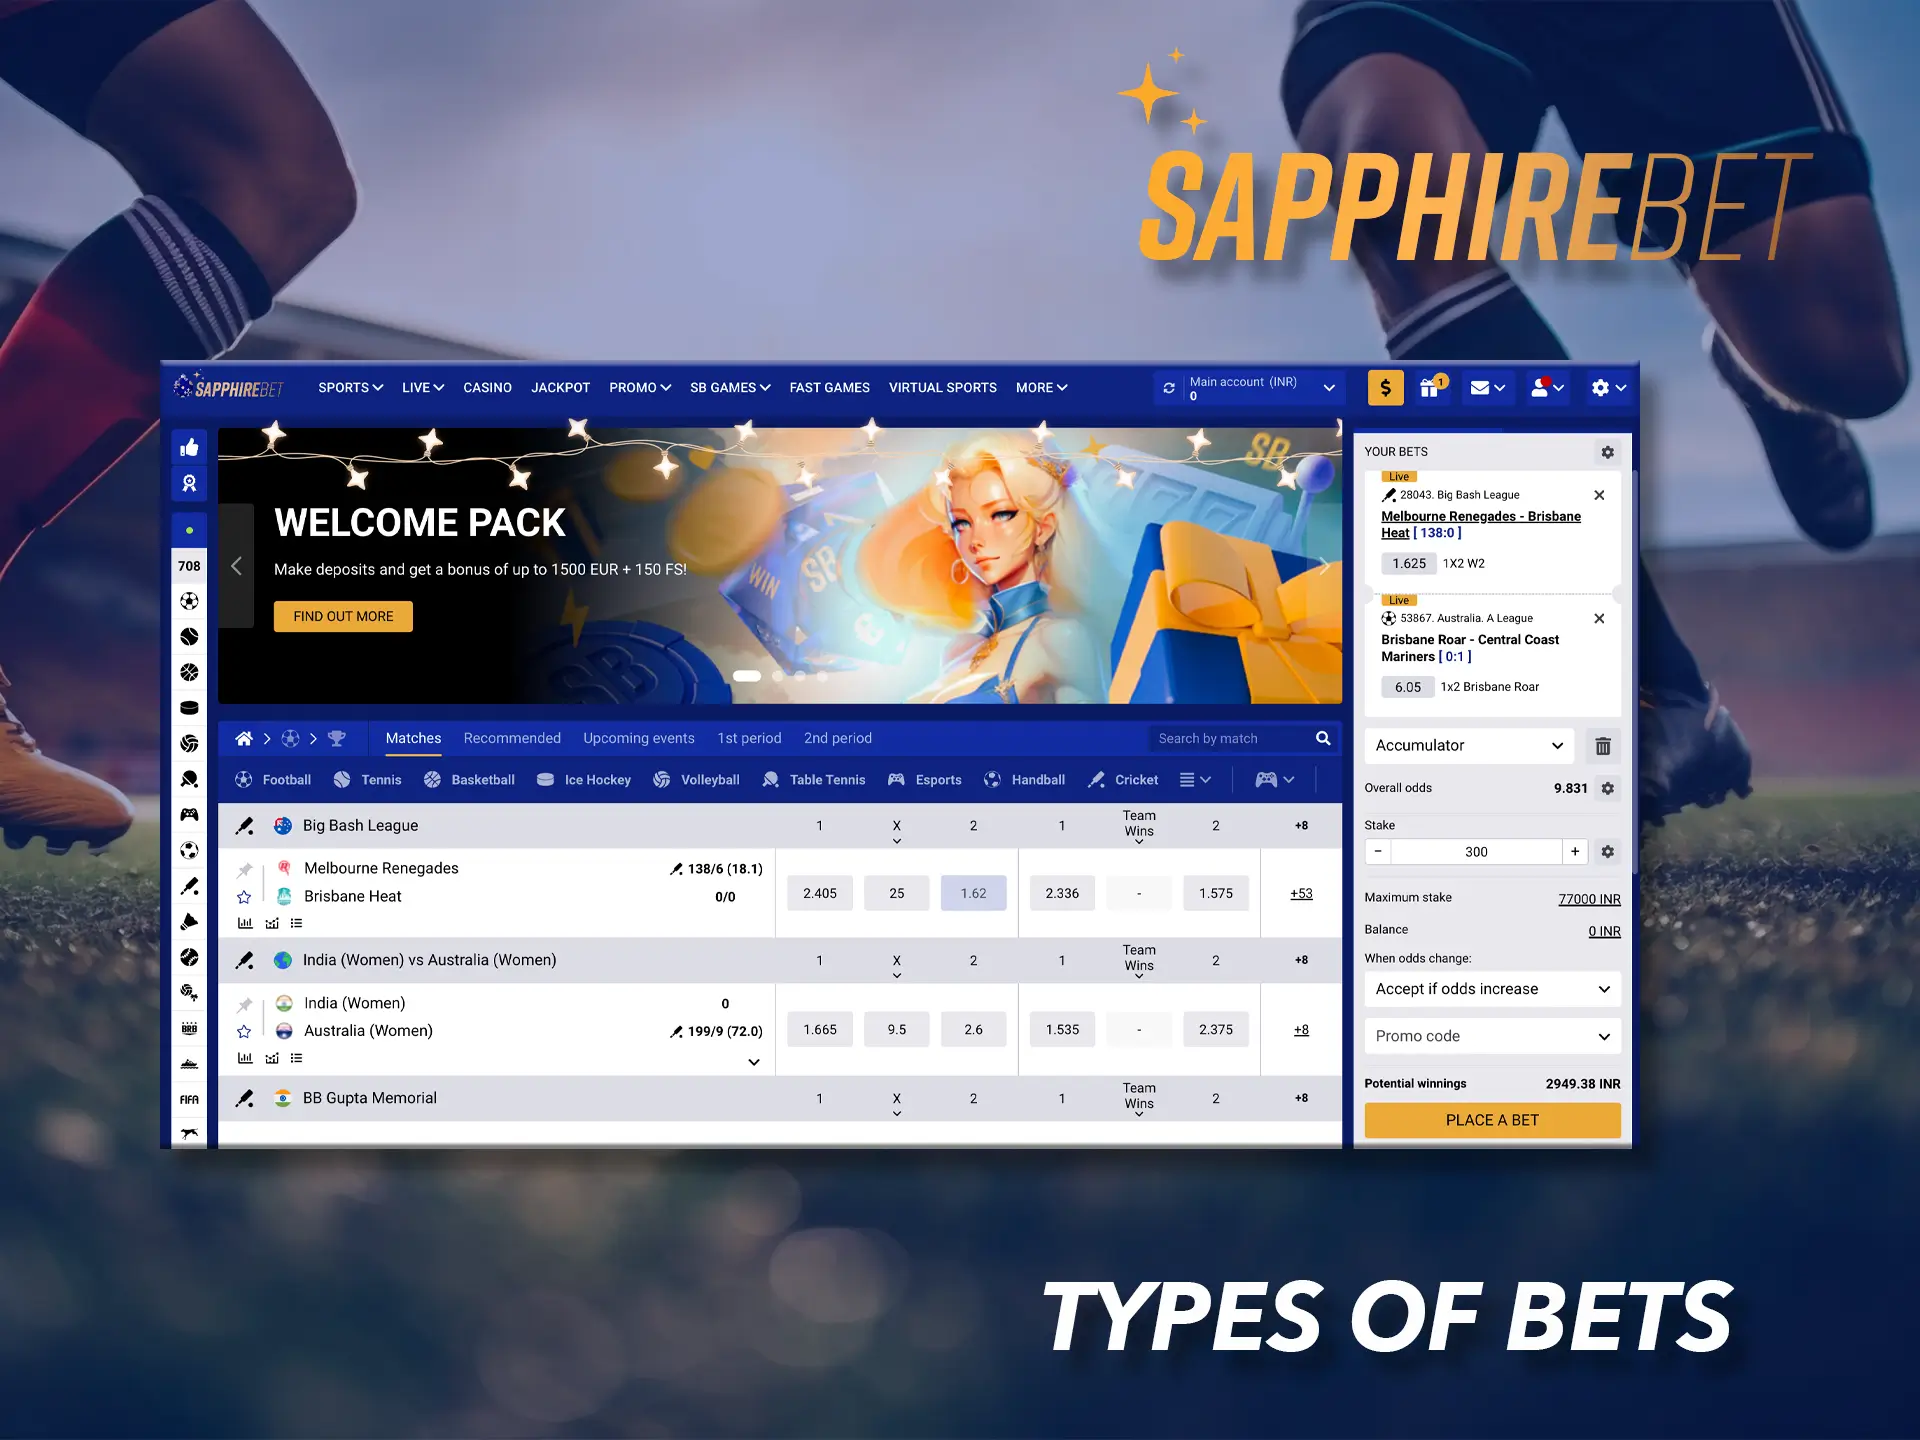 Sapphirebet has 3 types of bets, decide which suits you best.